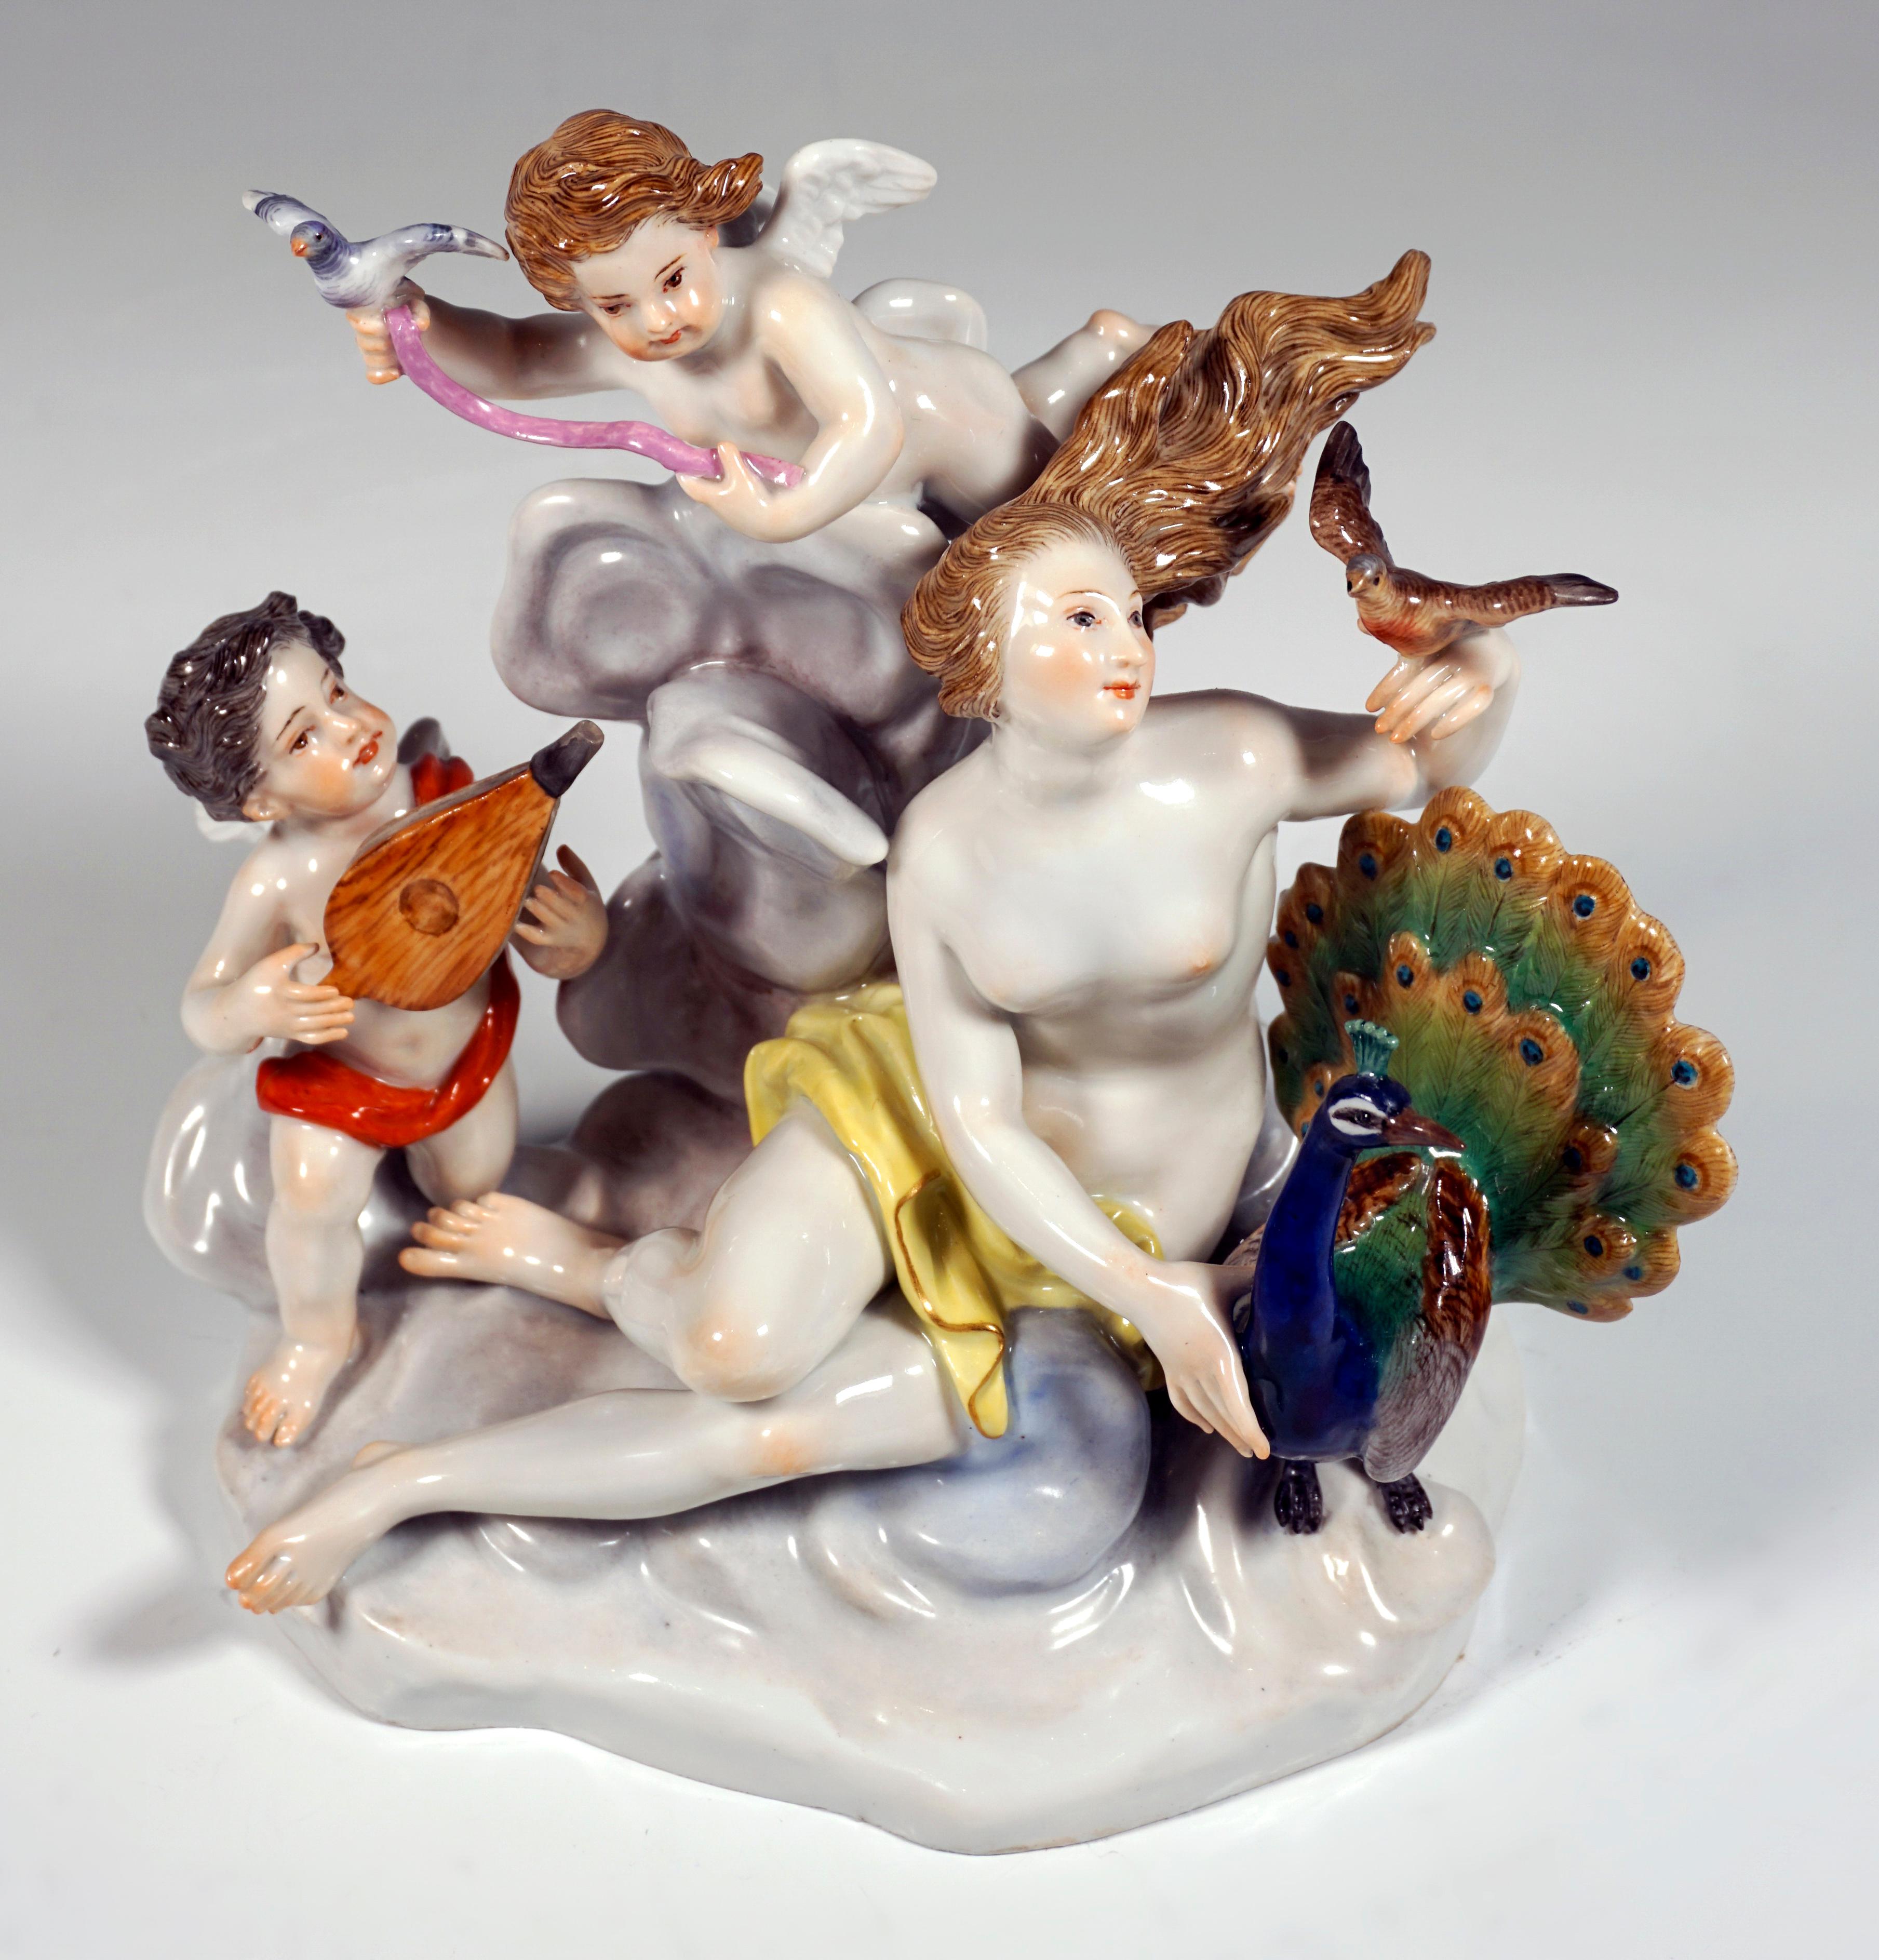 Very rare and Meissen porcelain group of the 19th century:
Juno, the Roman goddess of the air (Greek Hera), as a young woman with blowing hair sitting on a cloud, only covered with a cloth, next to her her attribute, the peacock as a bird of